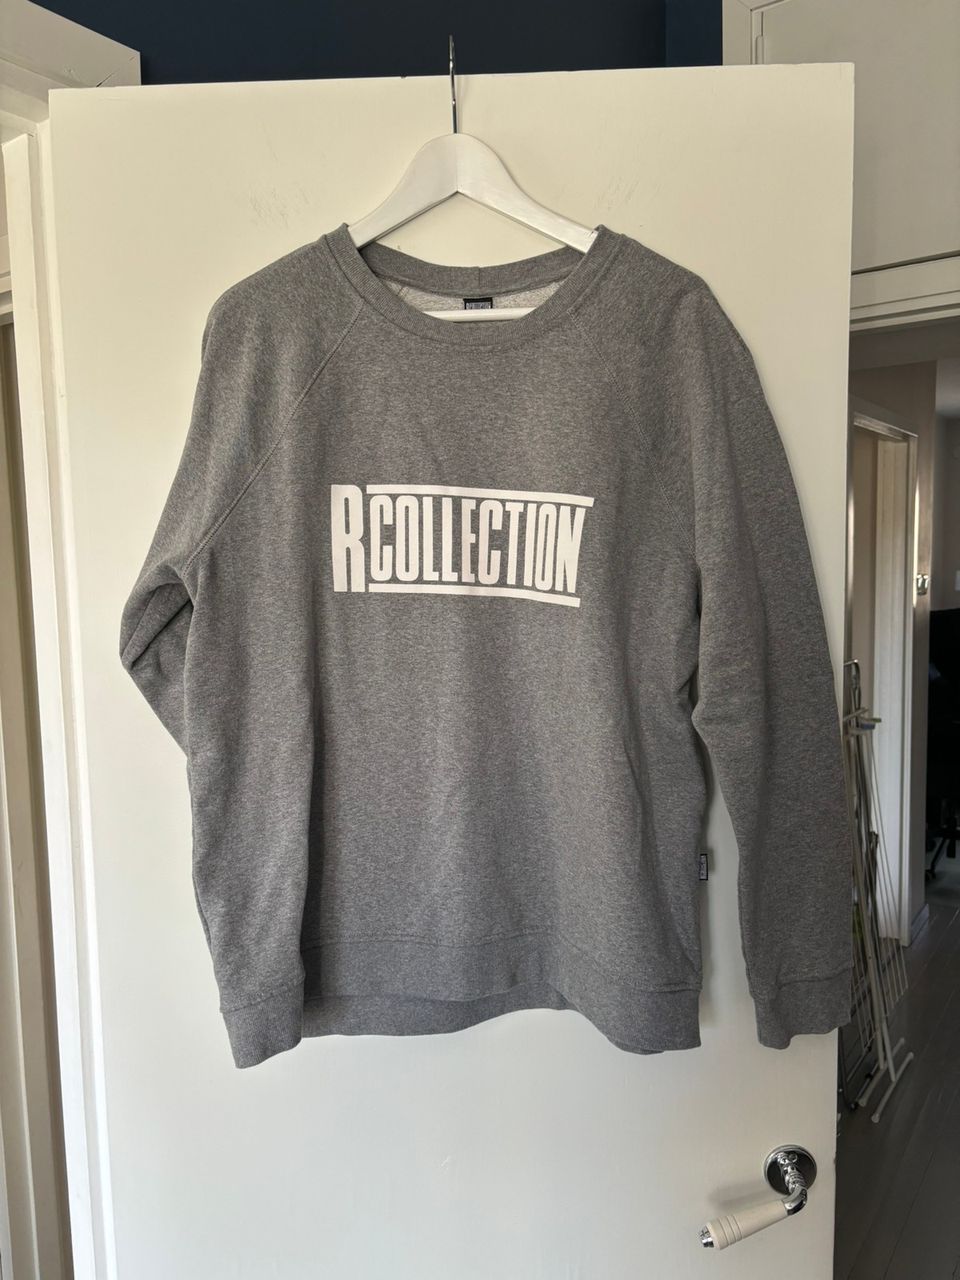 R-collection college XL